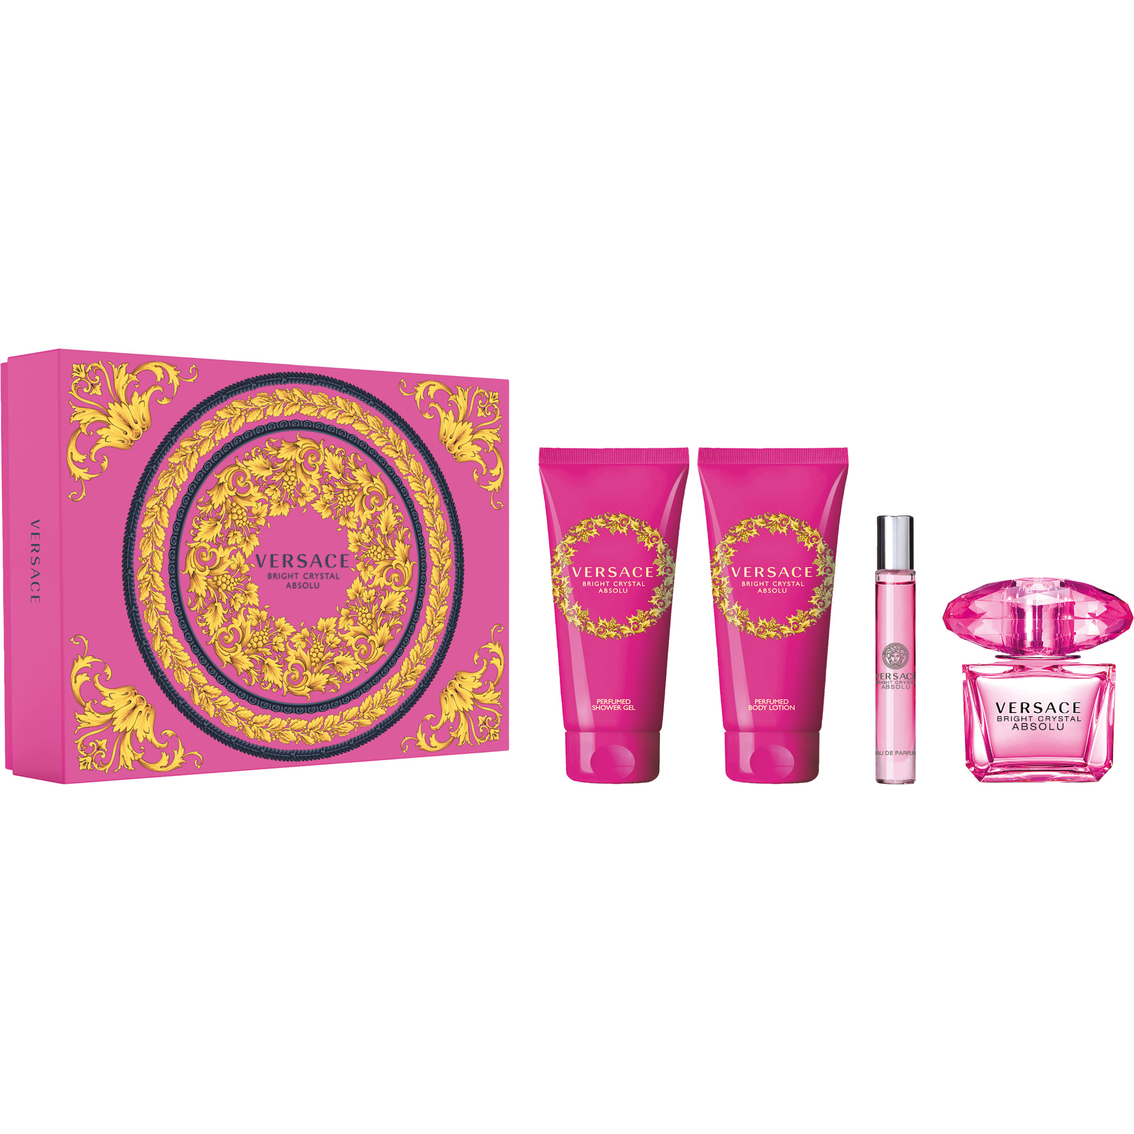 Versace Bright Crystal Absolute 4 Pc. Gift Set | Gift Sets | Beauty ...